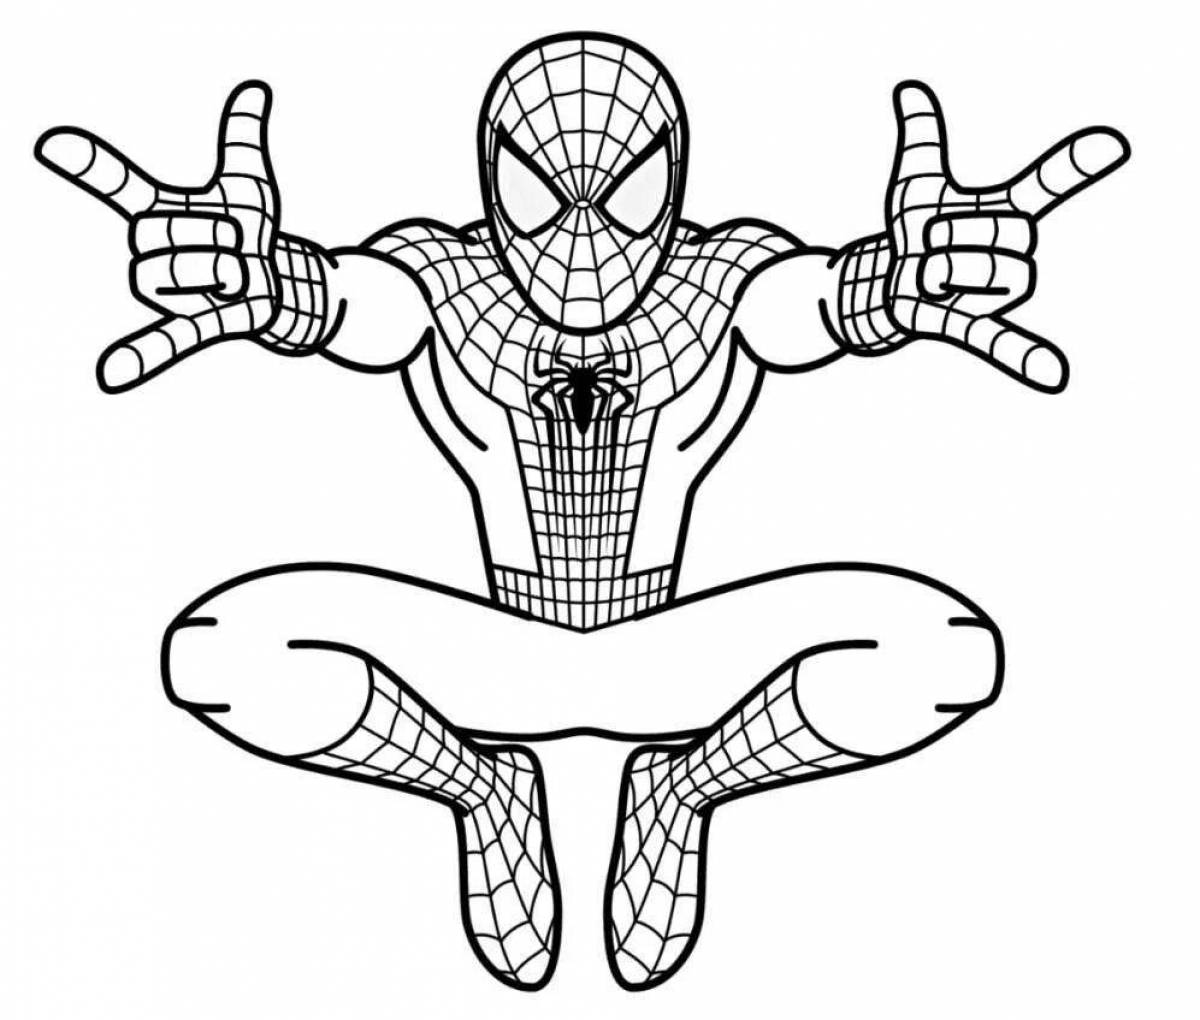 Spiderman fun coloring book for kids 6-7 years old